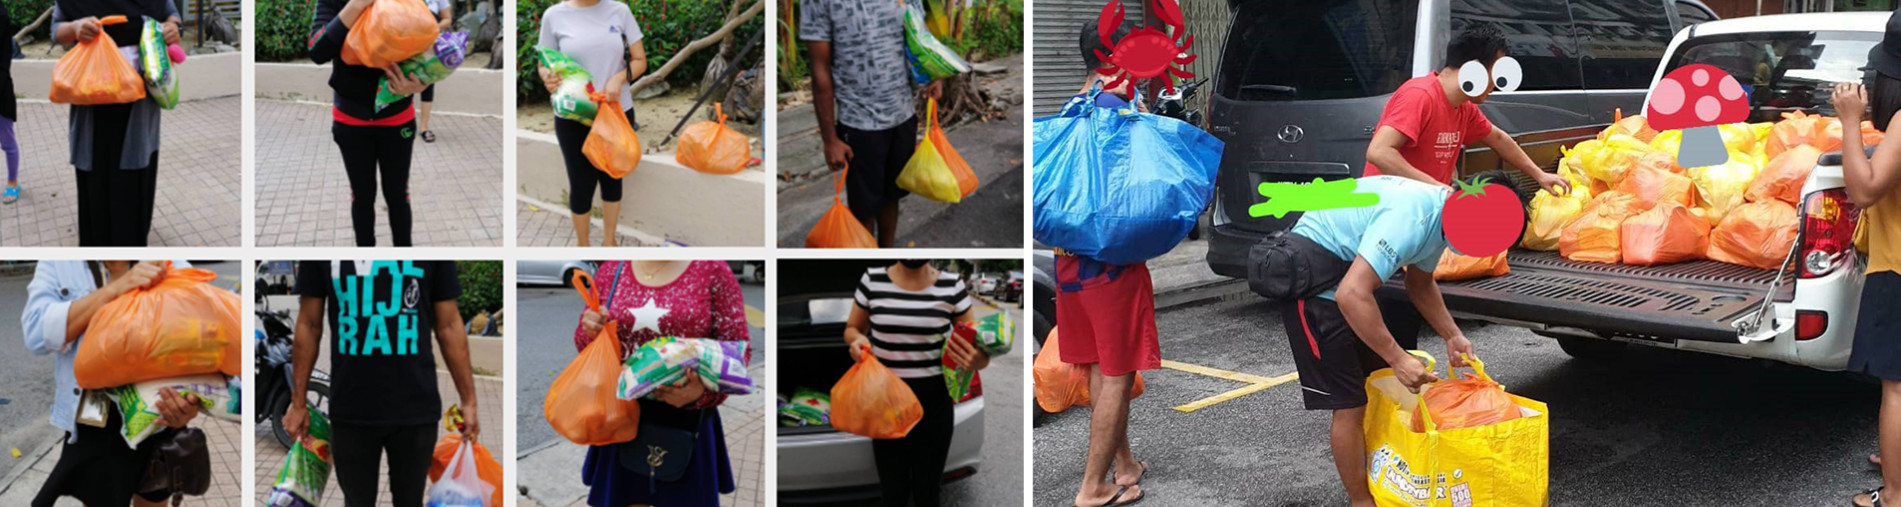 Fundraising for Vulnerable Communities in Old Klang Road & Surrounds